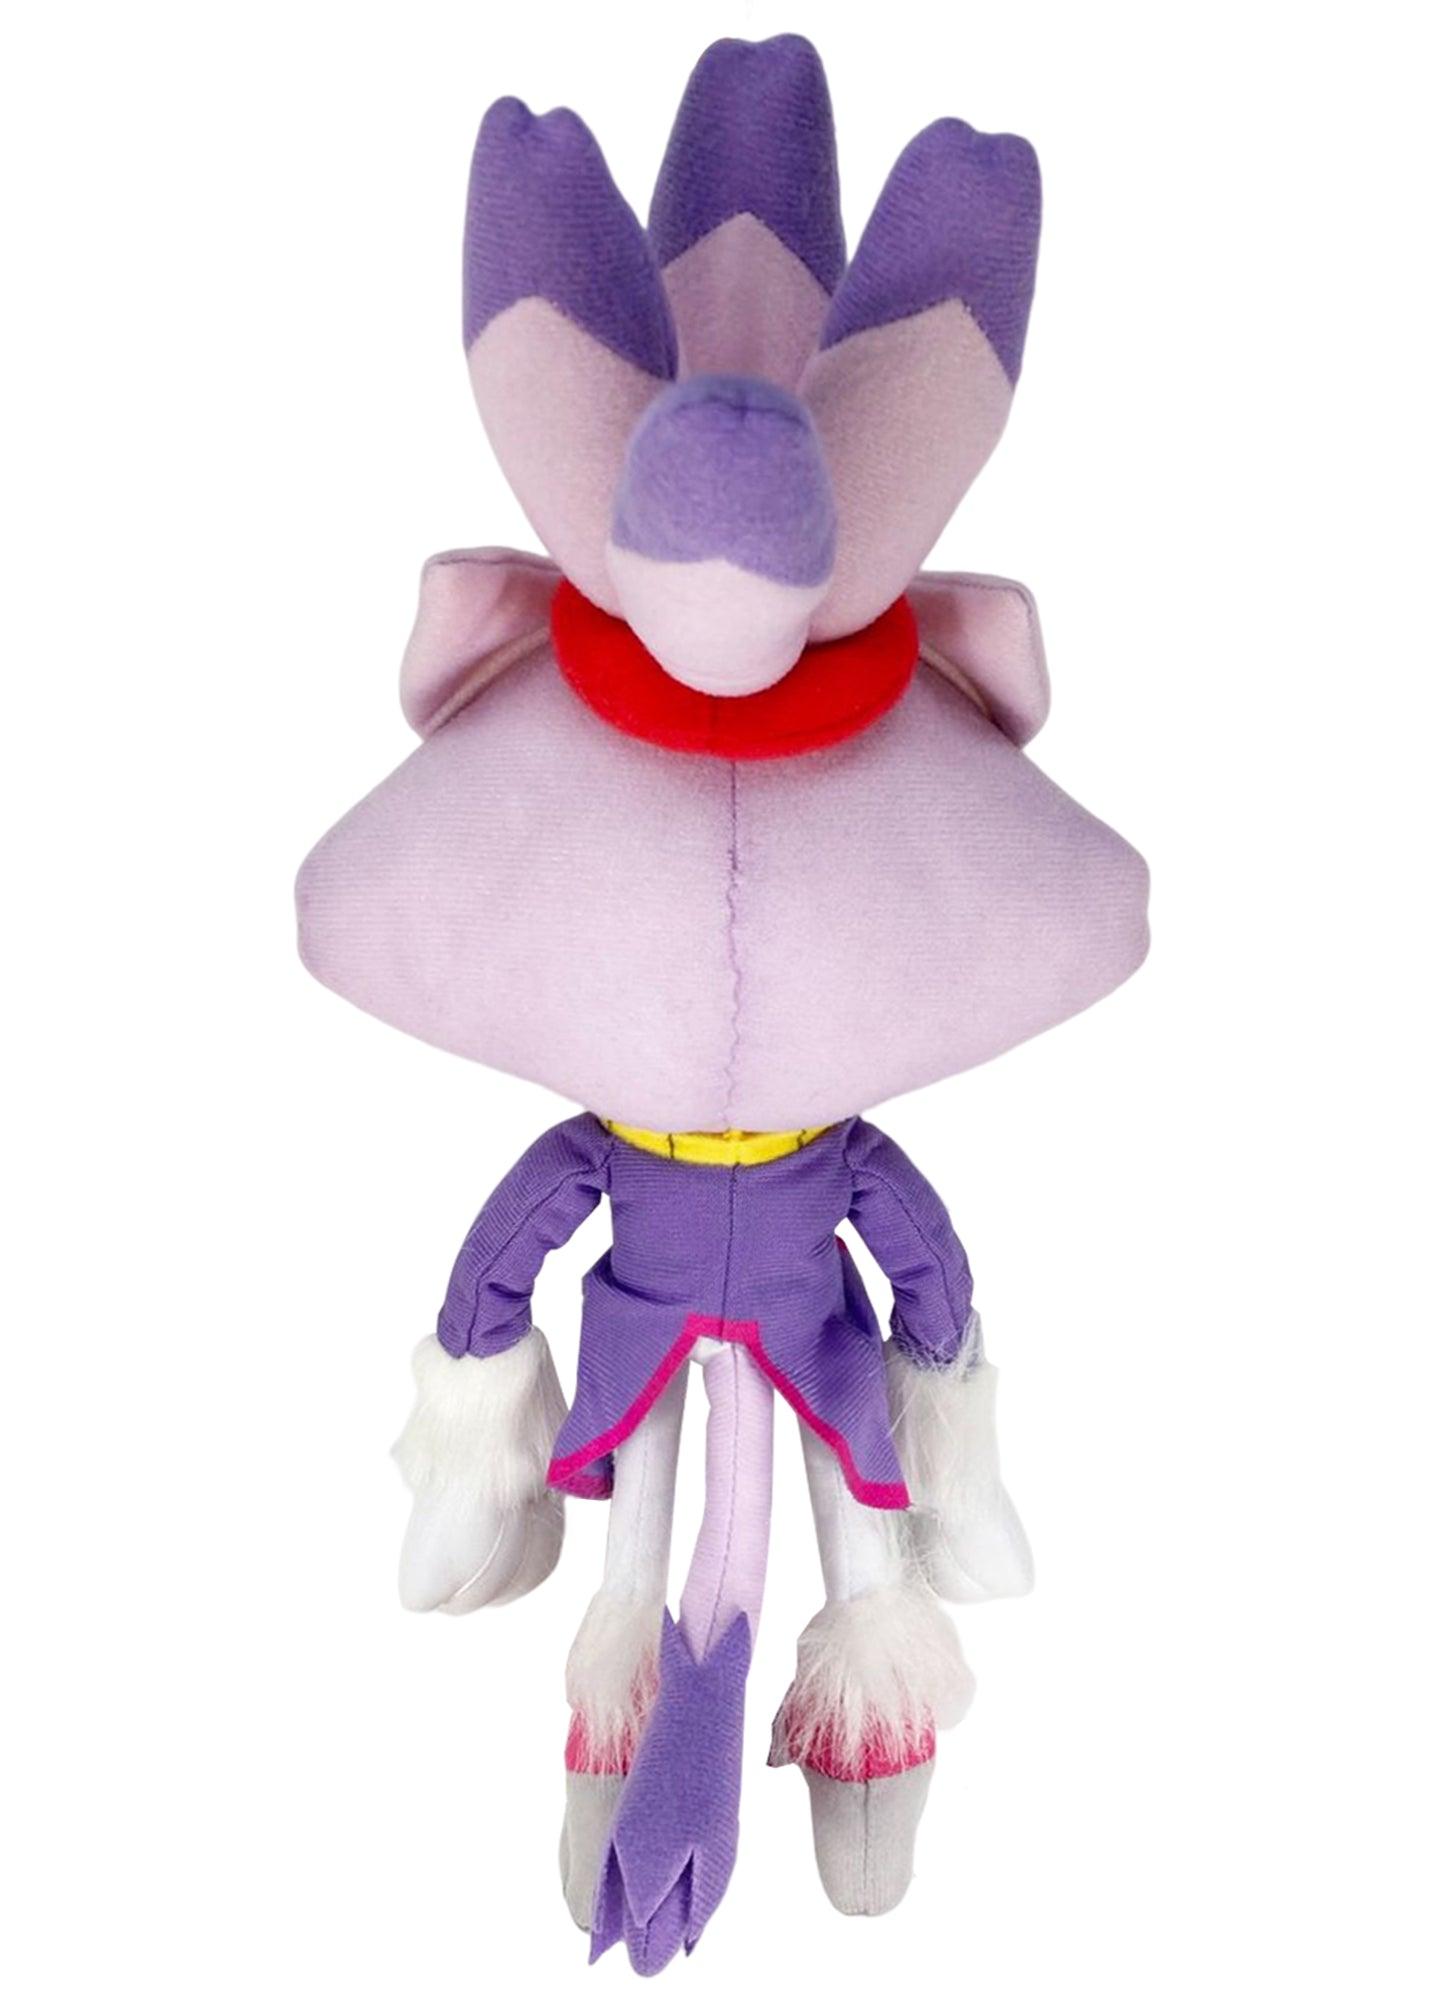 Sonic The Hedgehog - Mighty the Armadillo 9 Plush